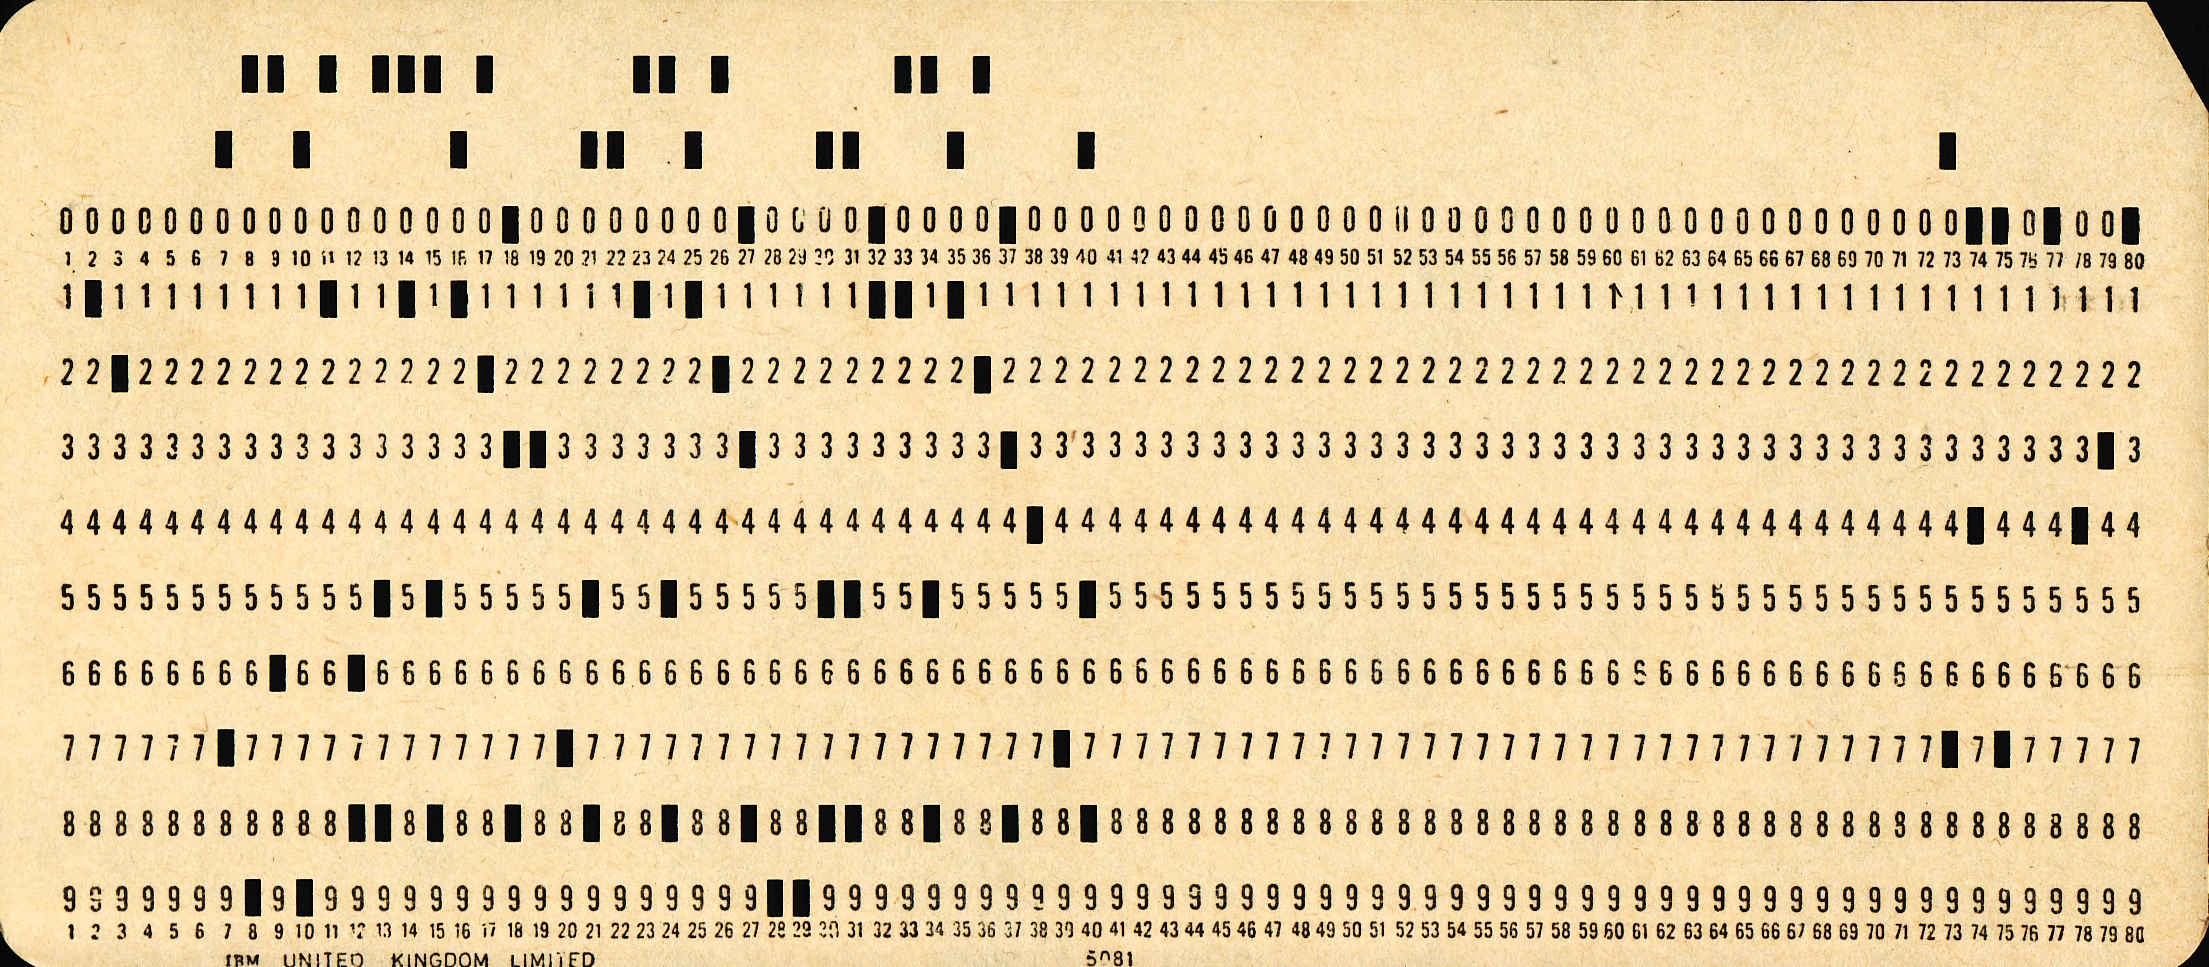 Punched cards like this one from IBM were Steve’s introduction to Computing as a student in high school. CC BY image by Peter Birkinshaw on Wikimedia Commons w.wiki/4icp